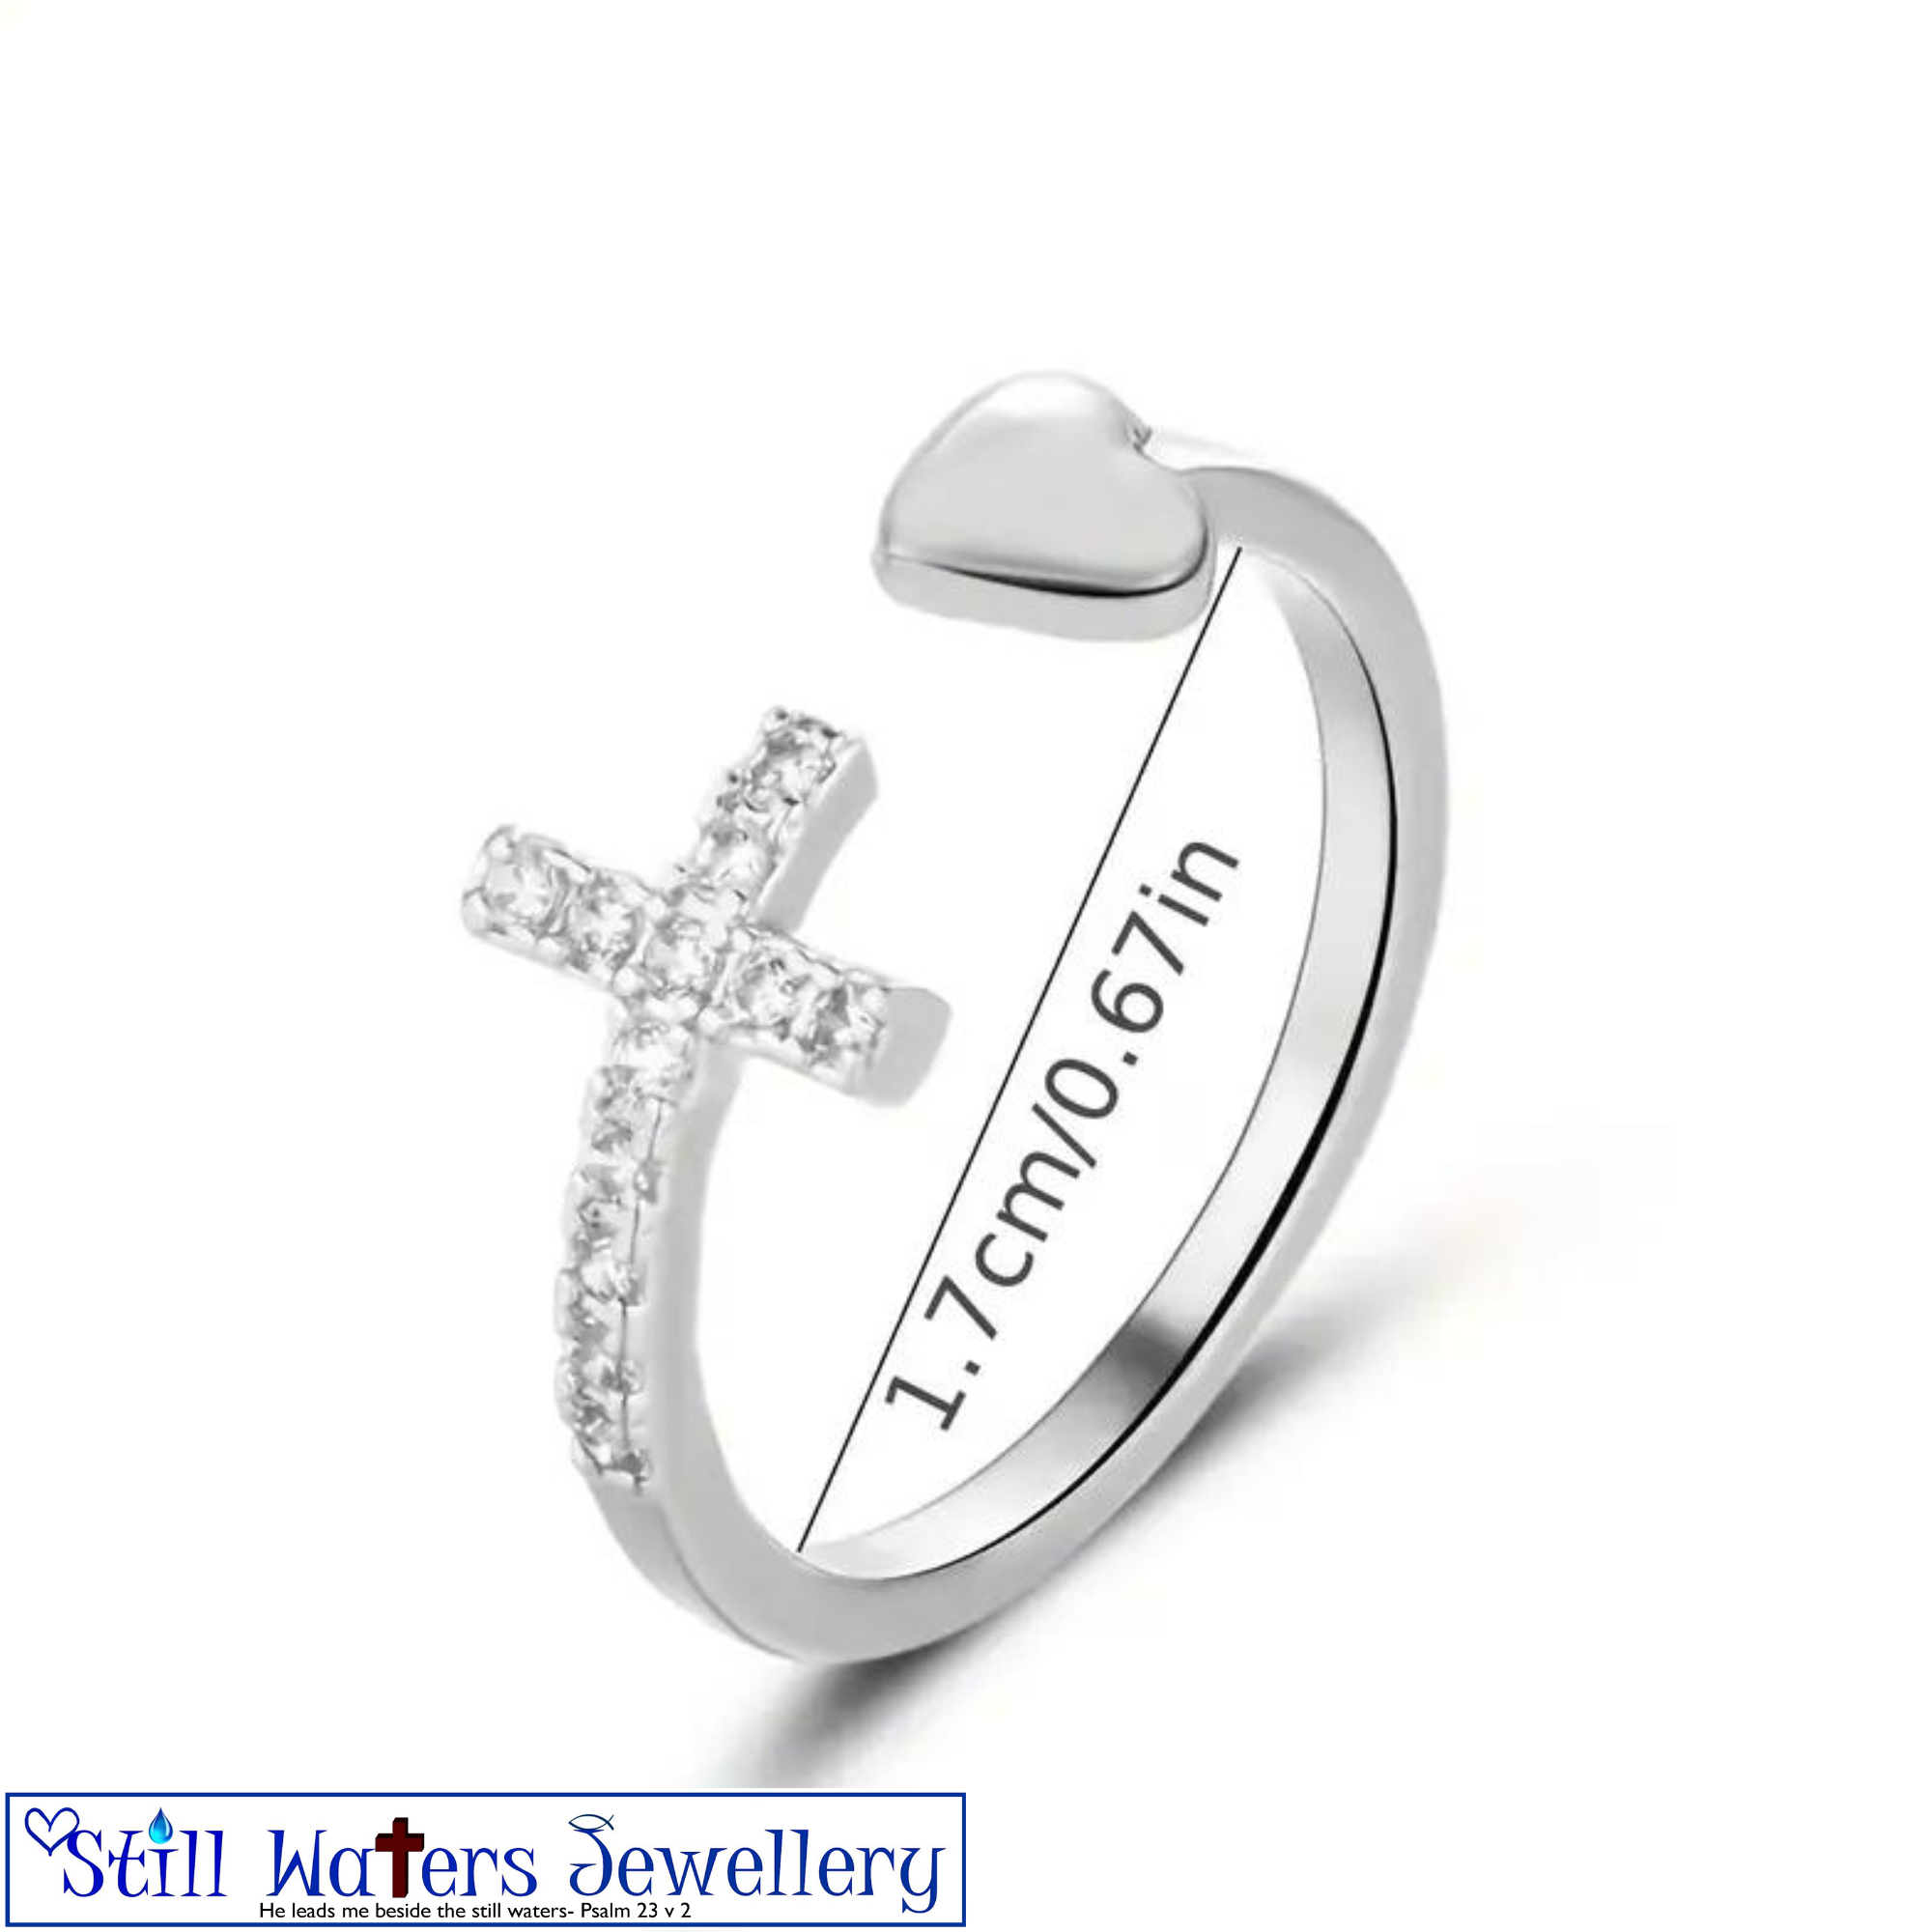 Love on the Cross Ring